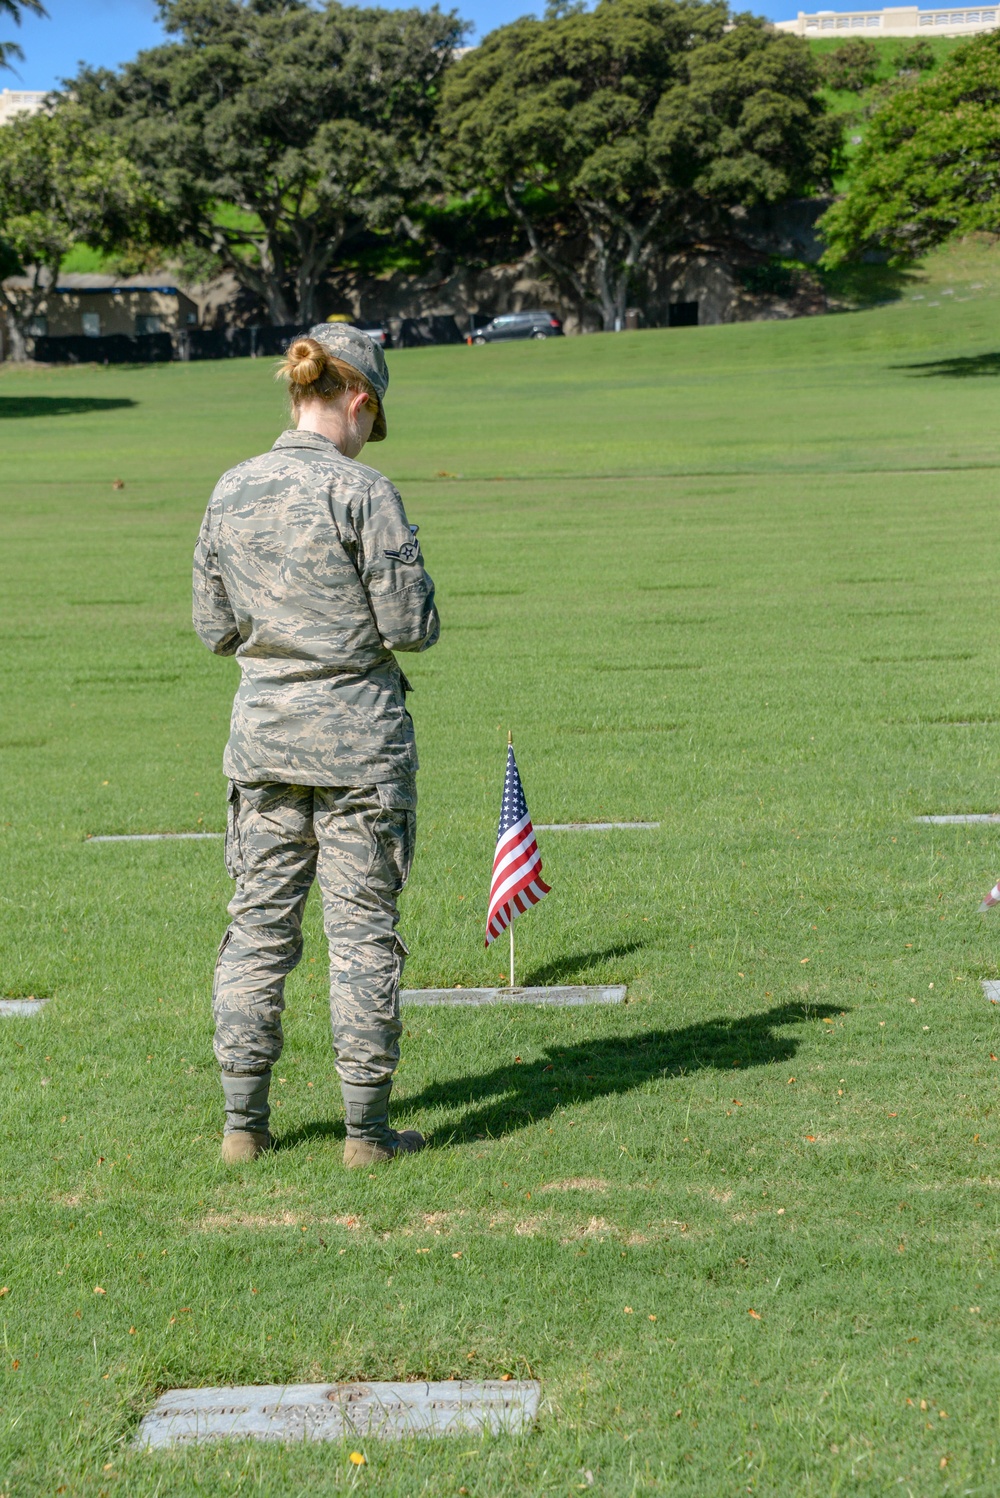 Tennessee Airman visits grave of World War II relative in Hawaii